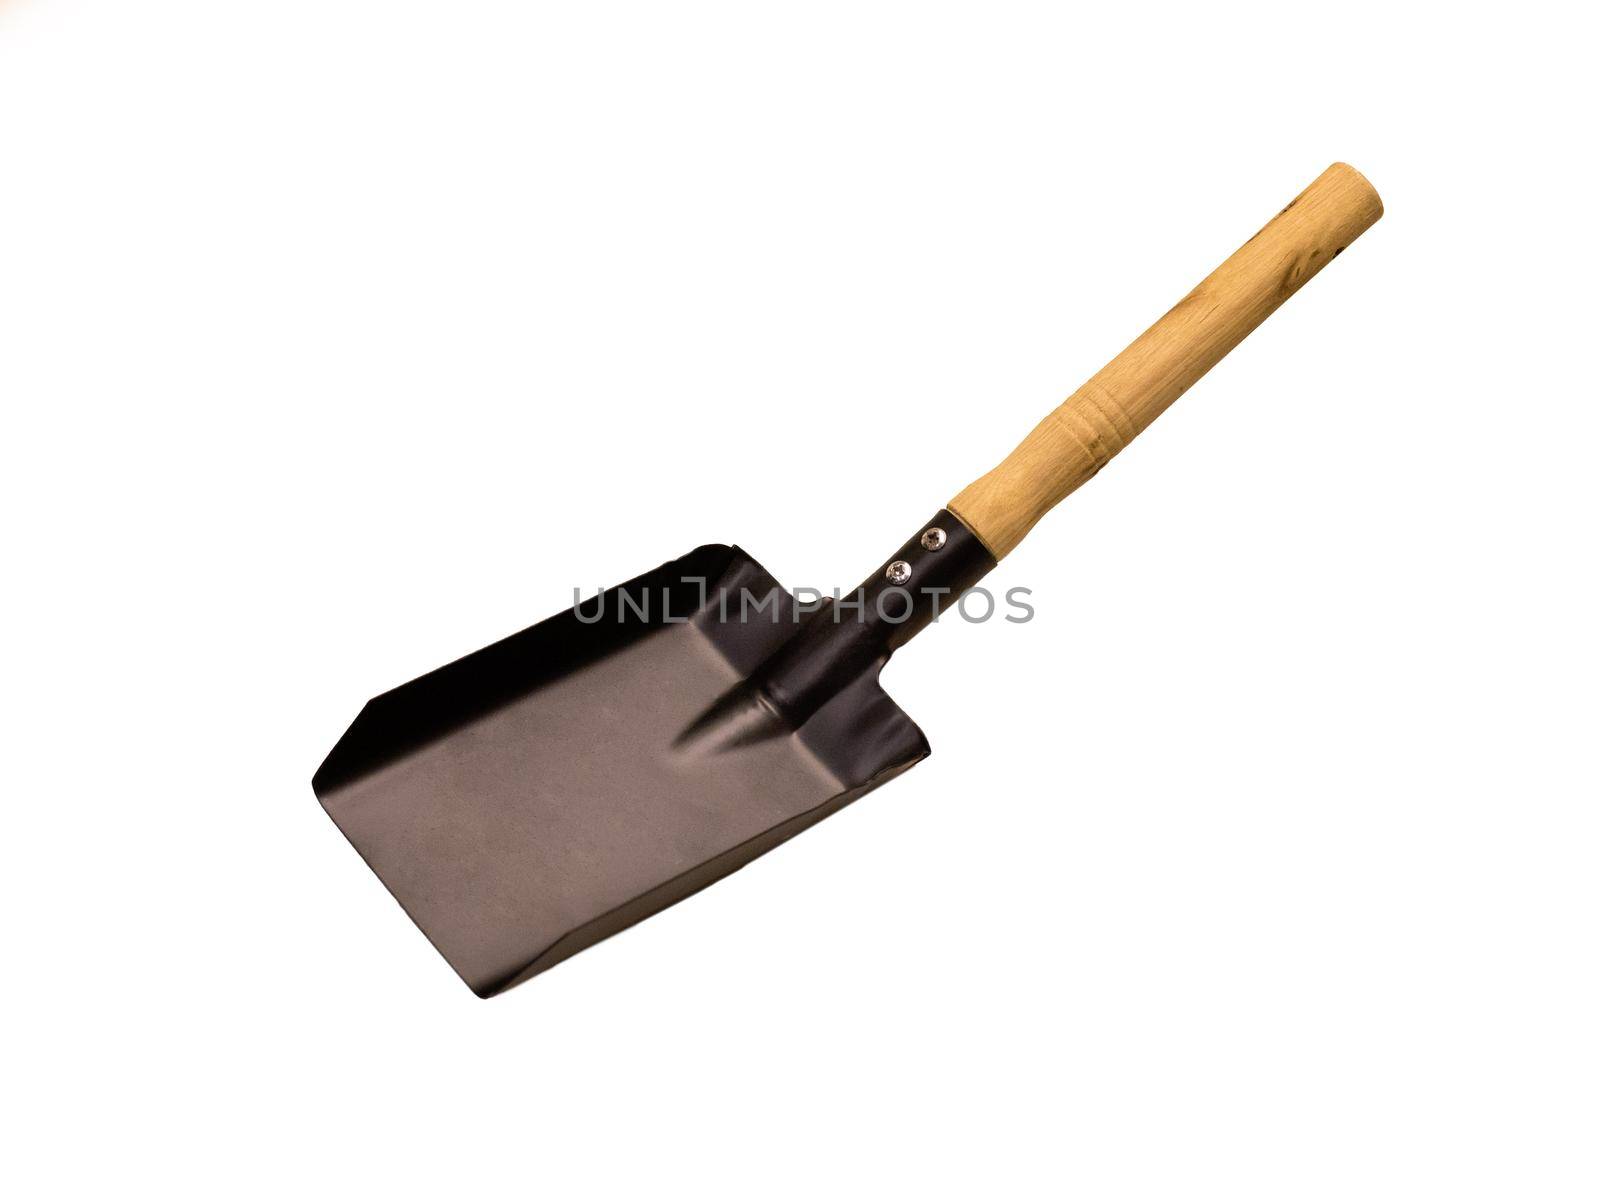 New shovel on white background by ferhad